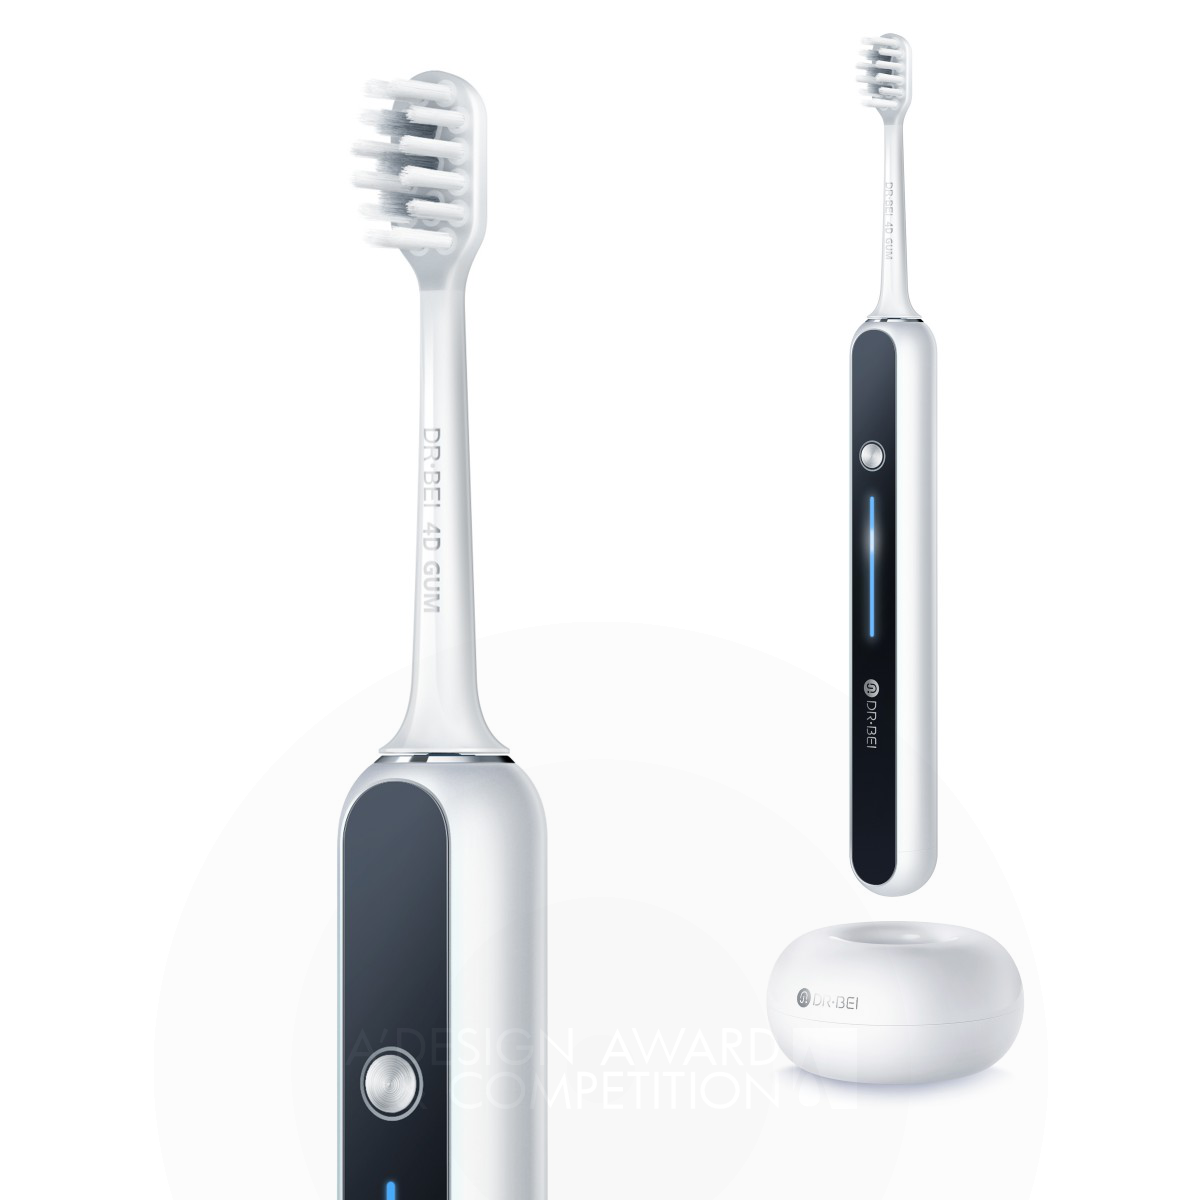 DR.BEI Unveils the Revolutionary S7 Sonic Electric Toothbrush